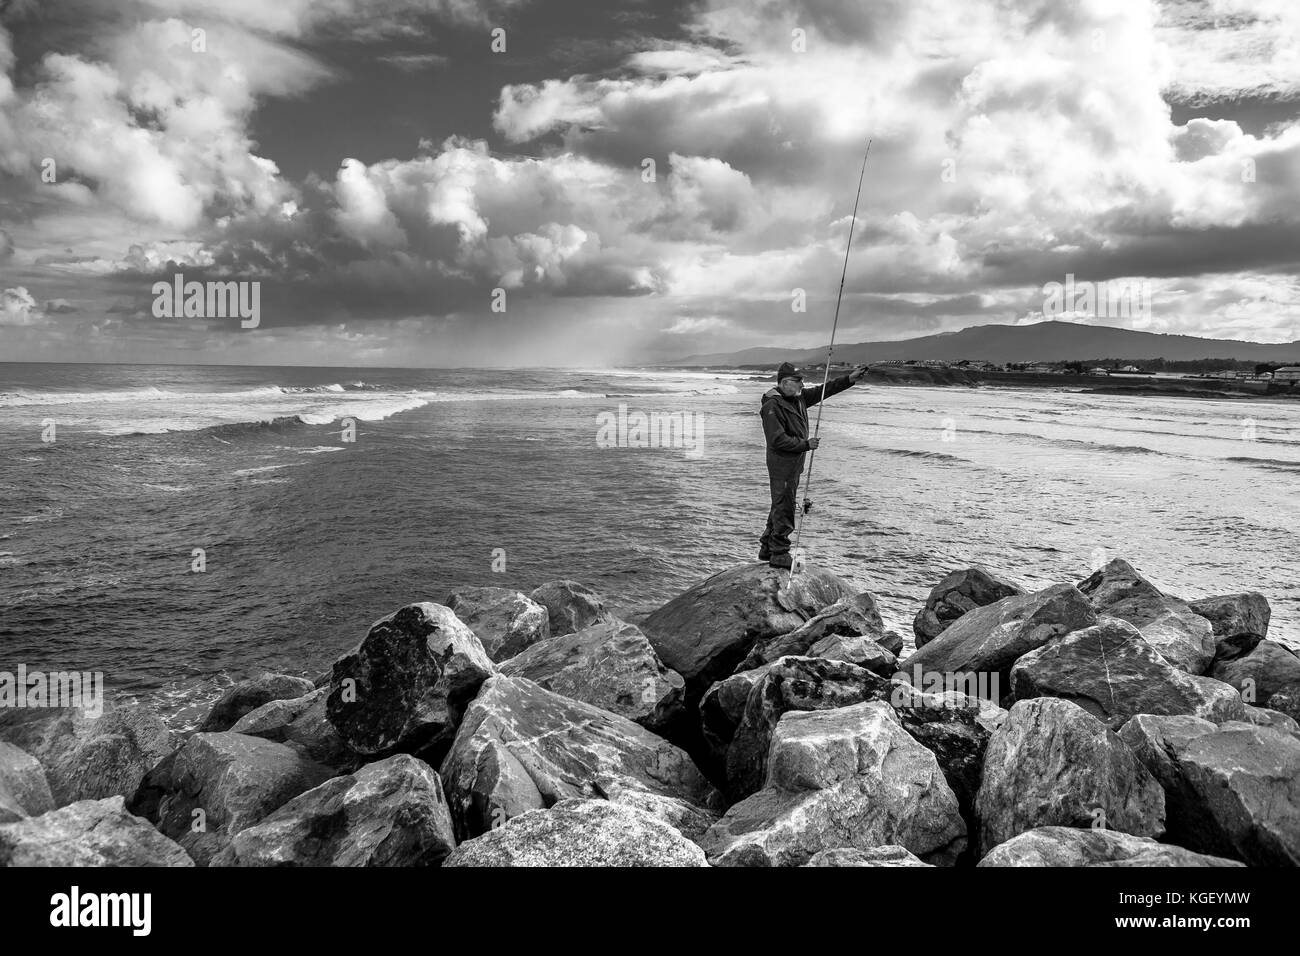 Fisherman fishing a stormy day with the sea in the background Stock Photo